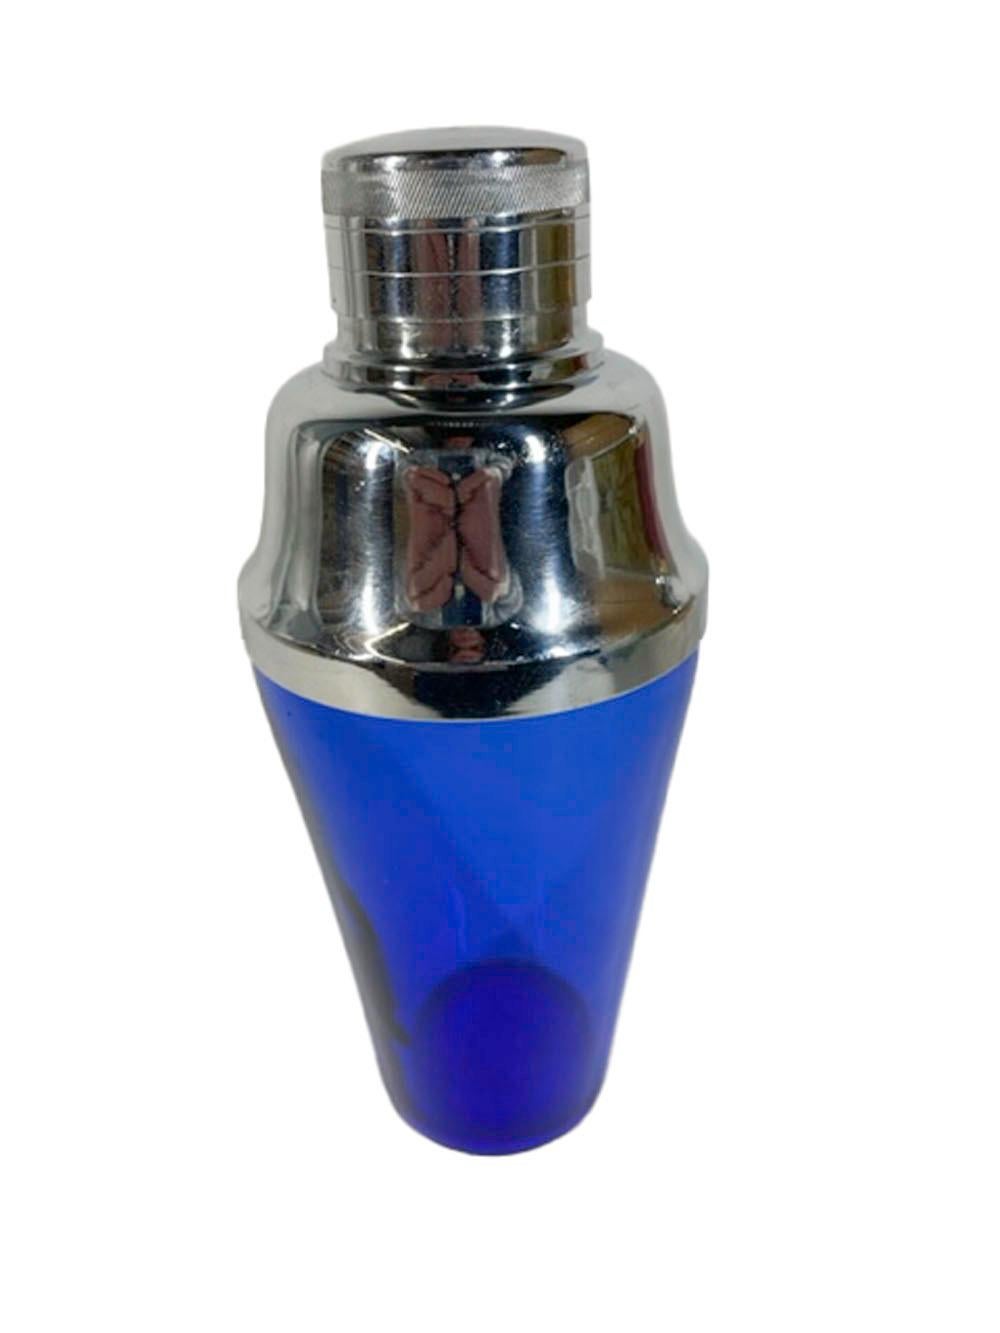 Mid-century cobalt blue glass cocktail shaker with a high domed center pour chrome lid with integral strainer and jigger cap.